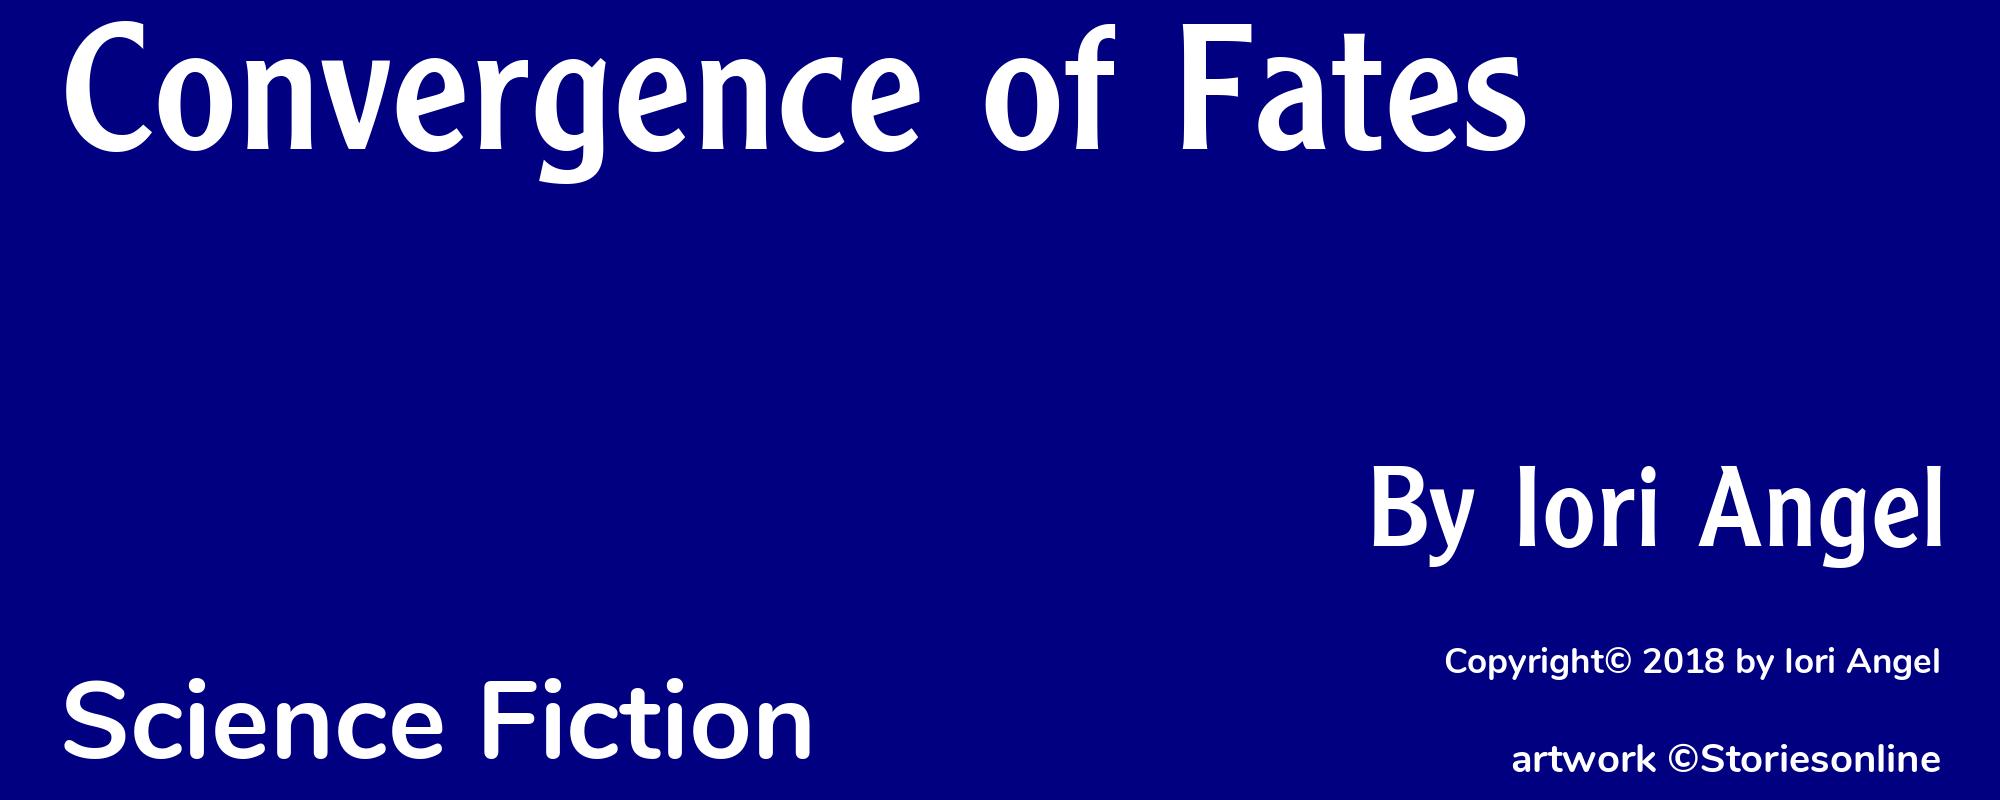 Convergence of Fates - Cover